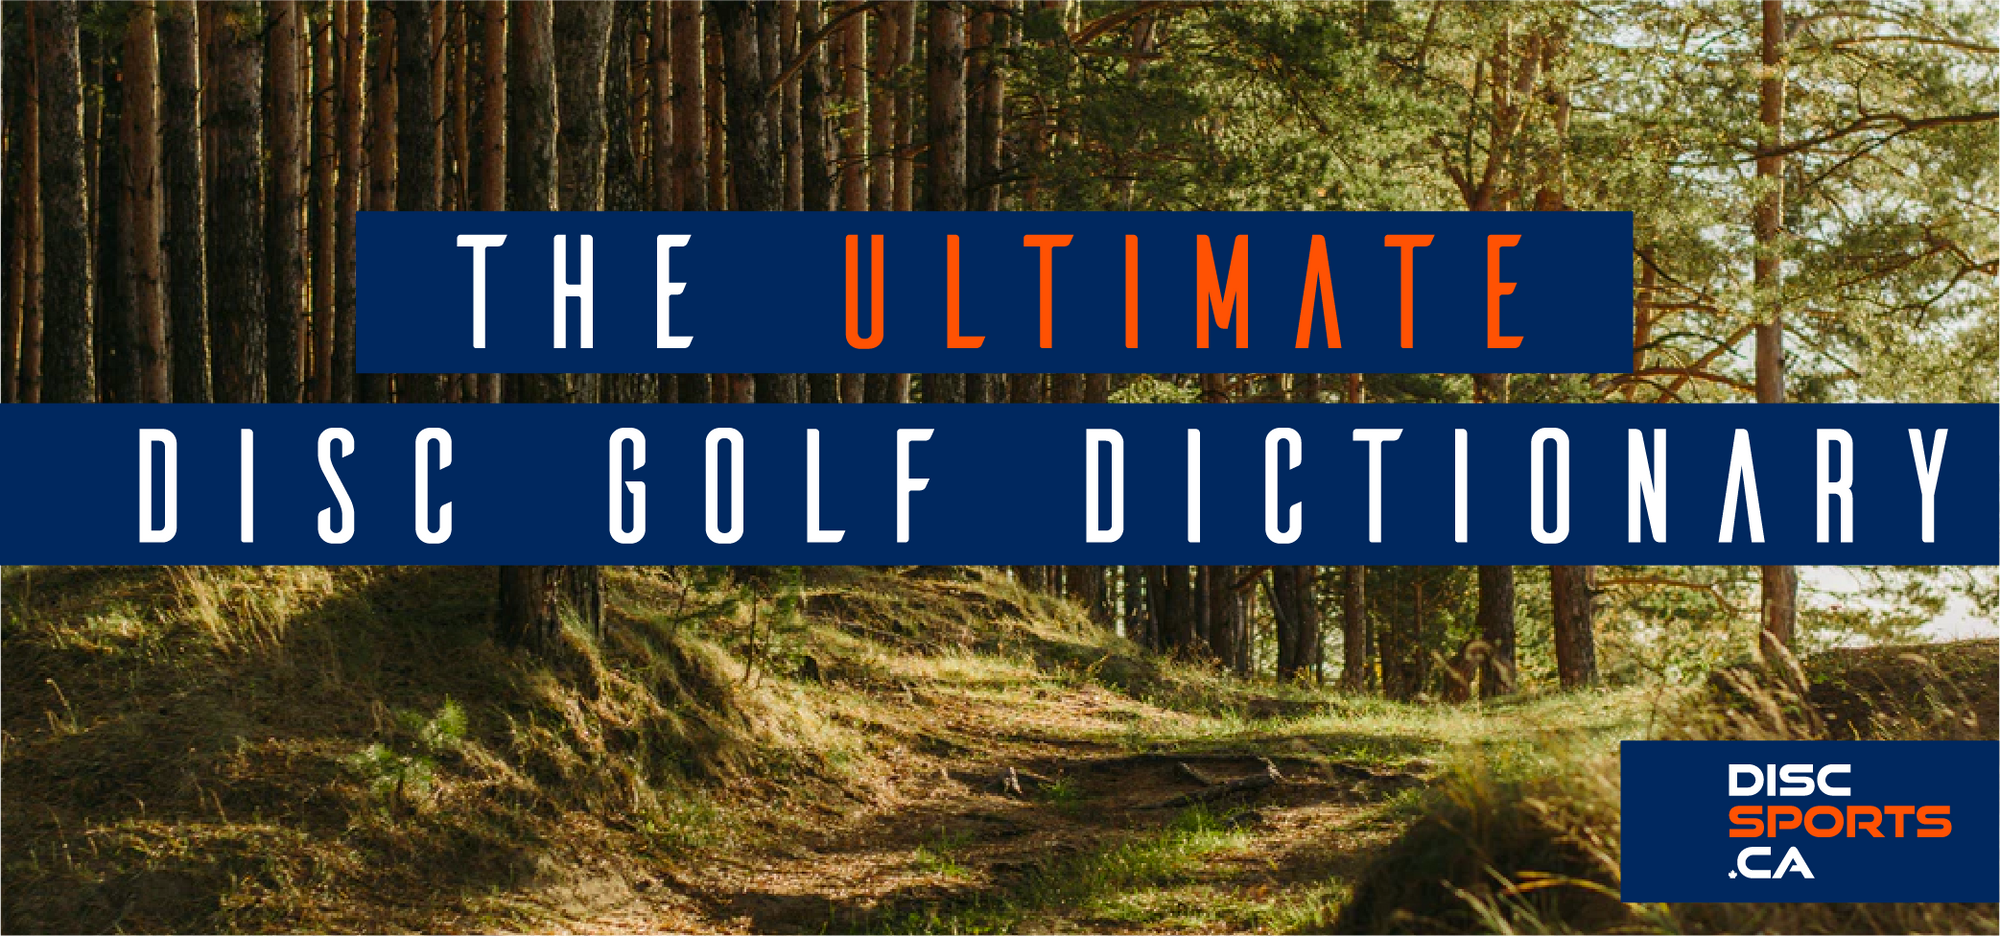 The Ultimate Disc Golf Dictionary